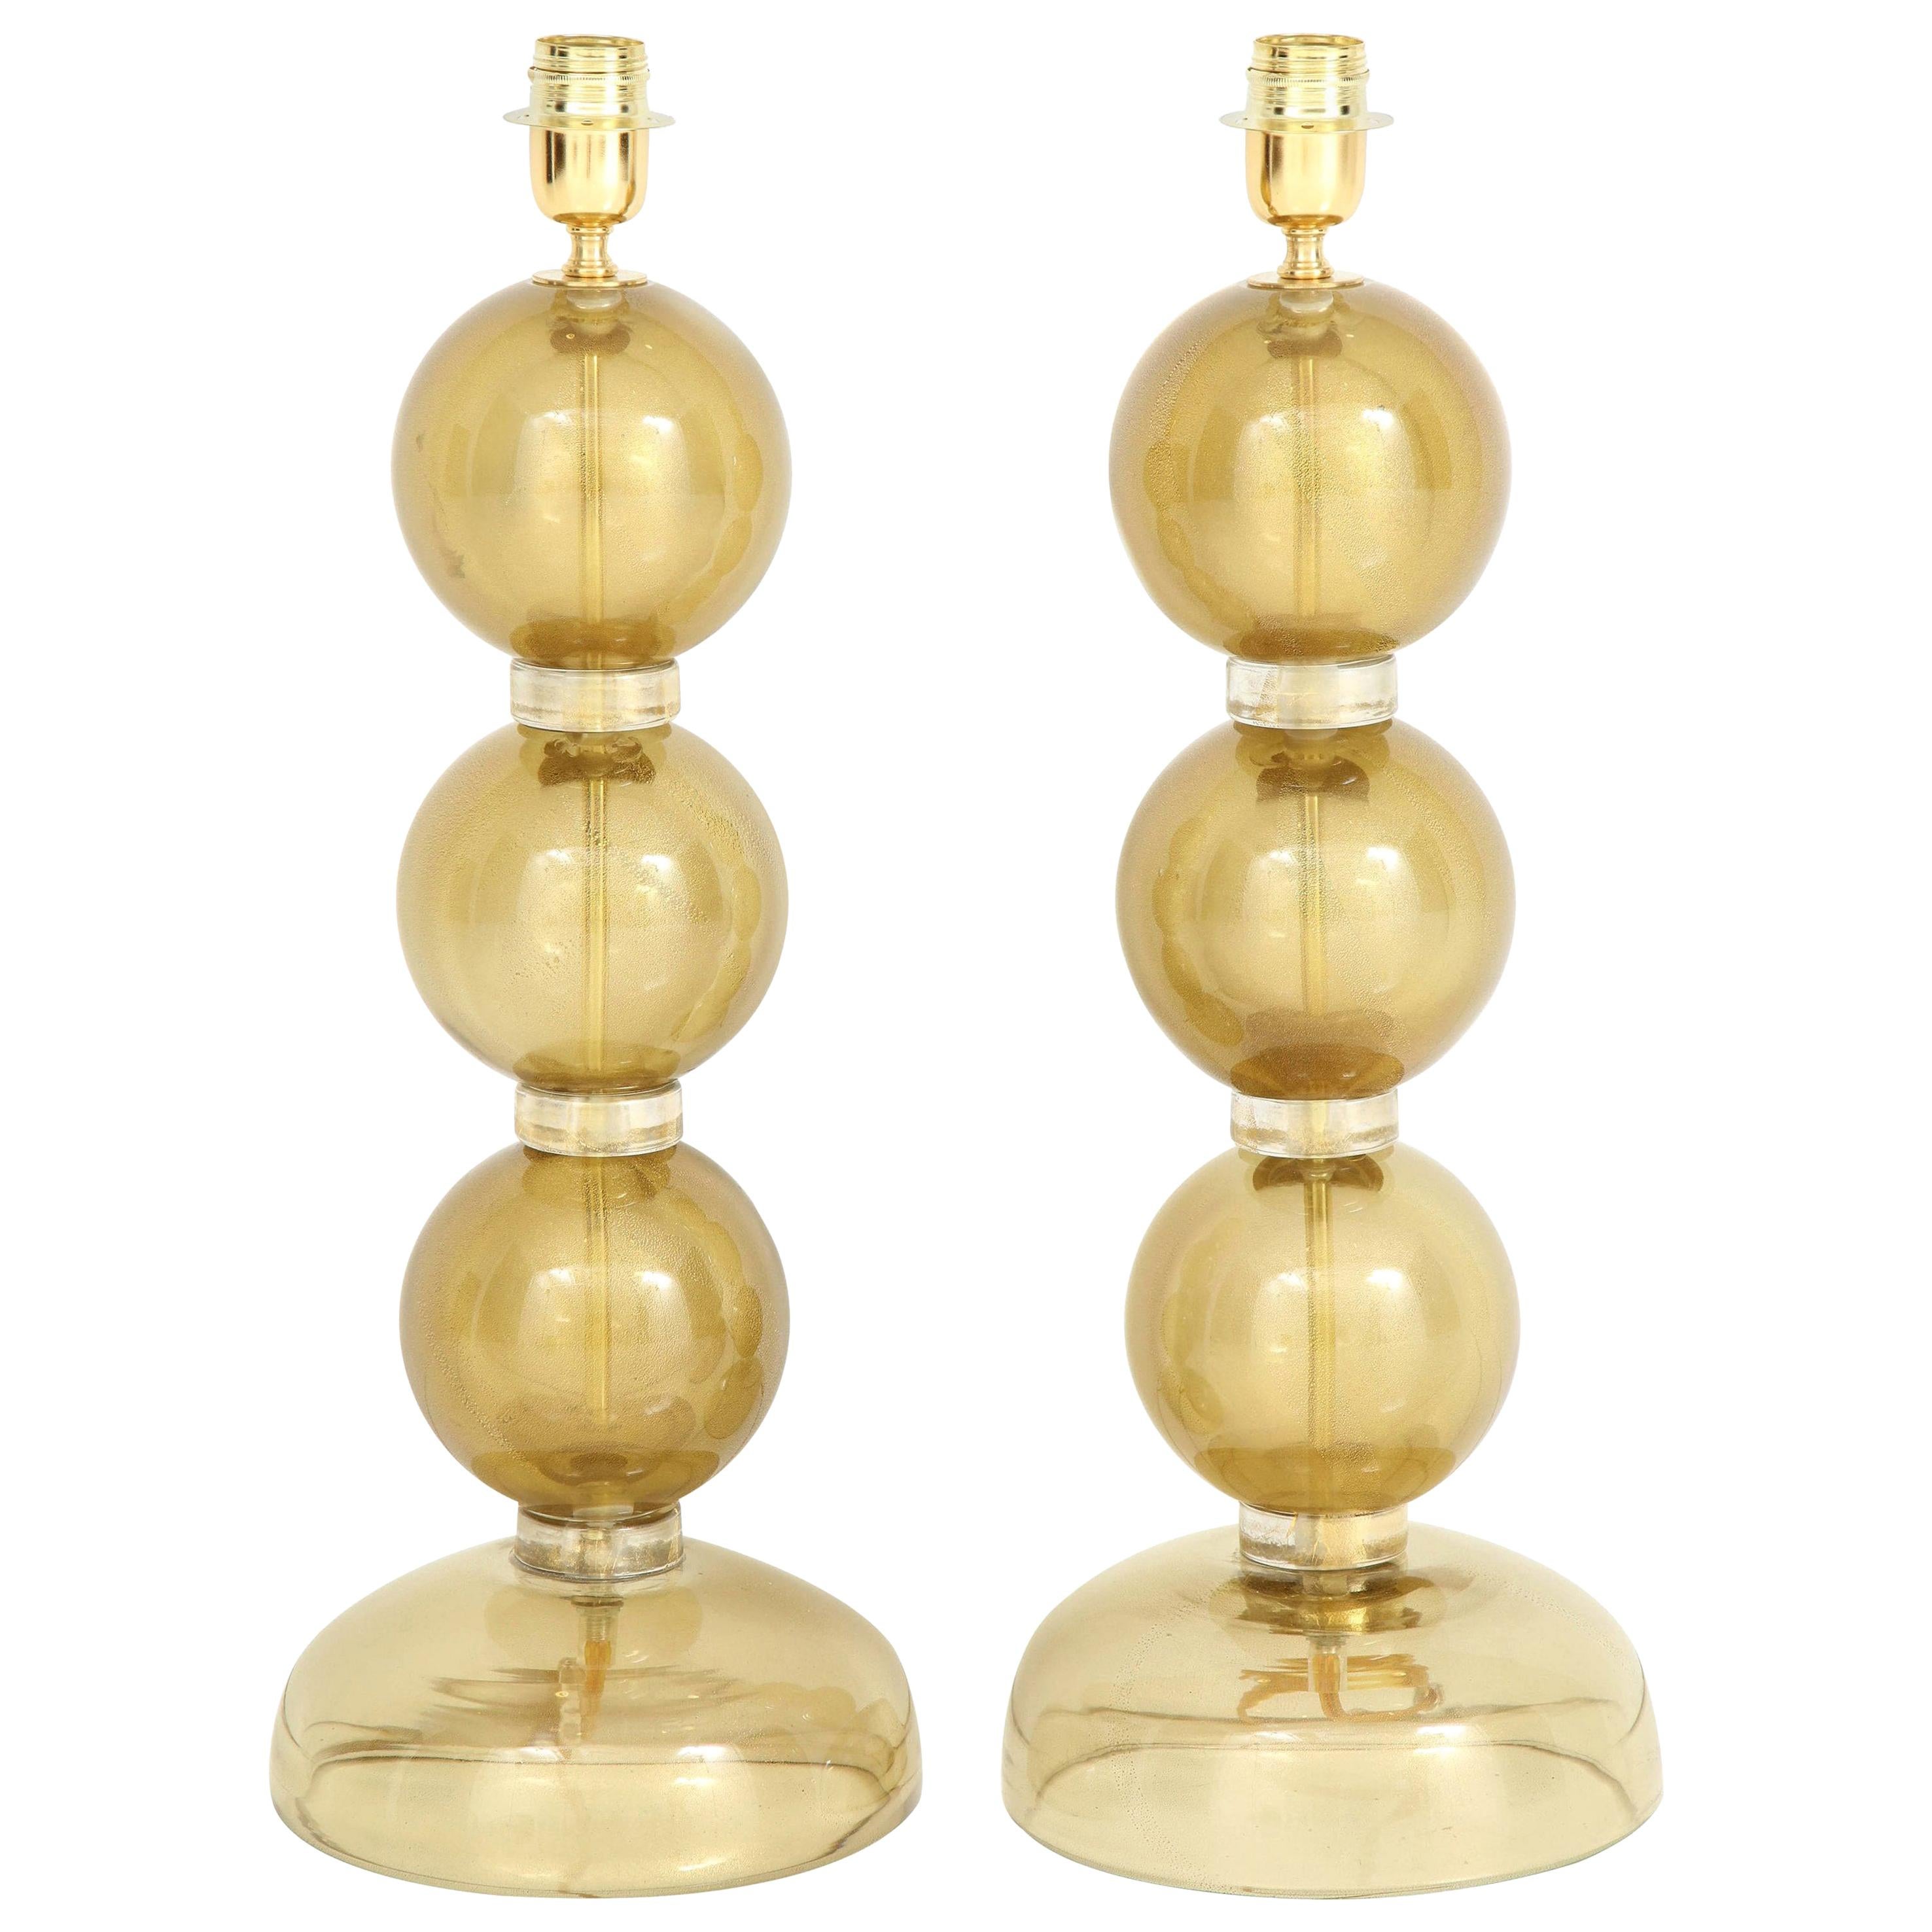 Large Pair of 23k Gold Infused Sphere Murano Glass Lamps, Italy